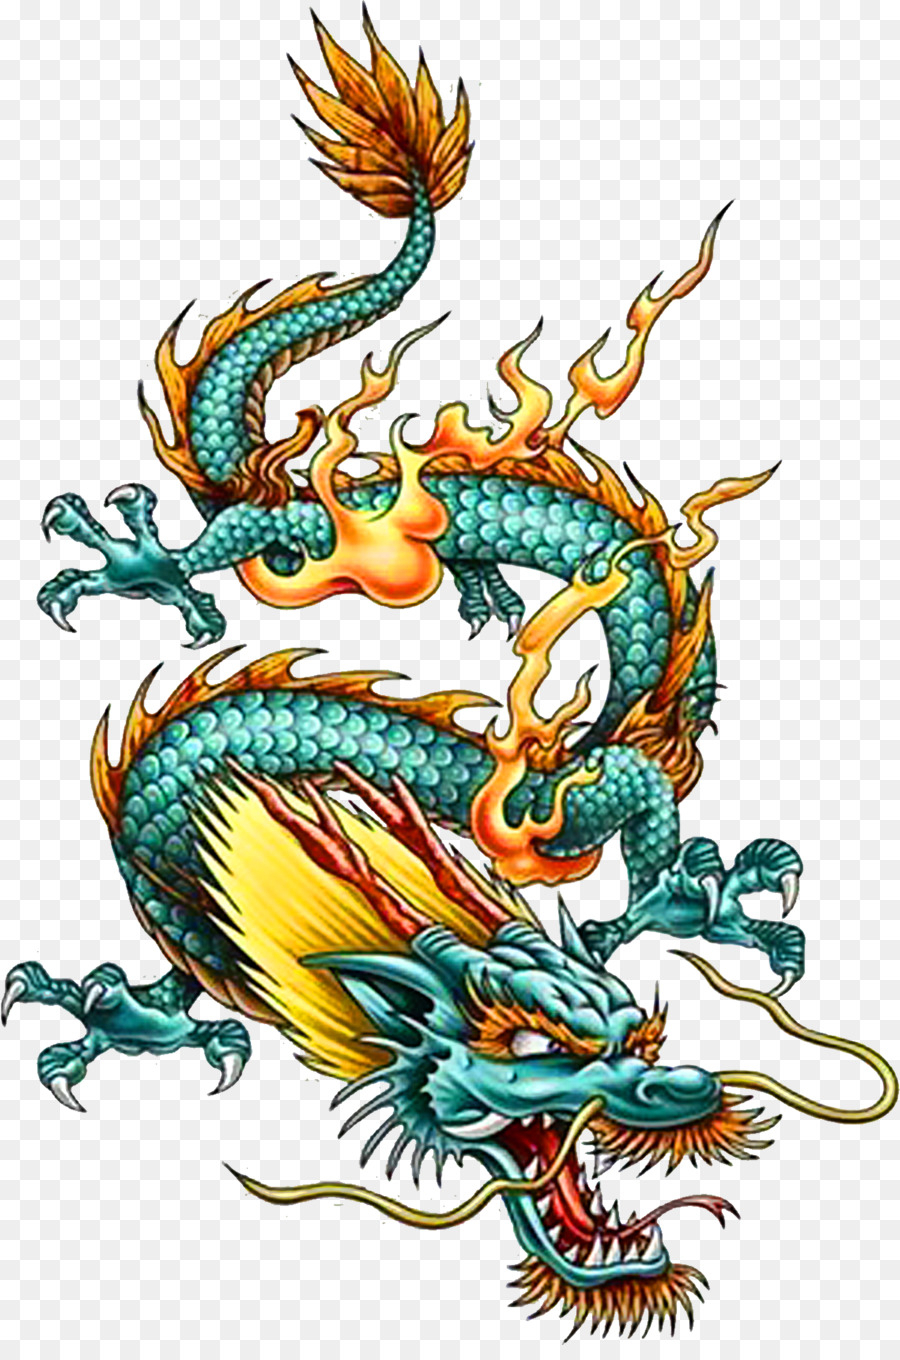 Chinese Dragon Png Download - 1593*2380 - Free Transparent à Dessin Dragon